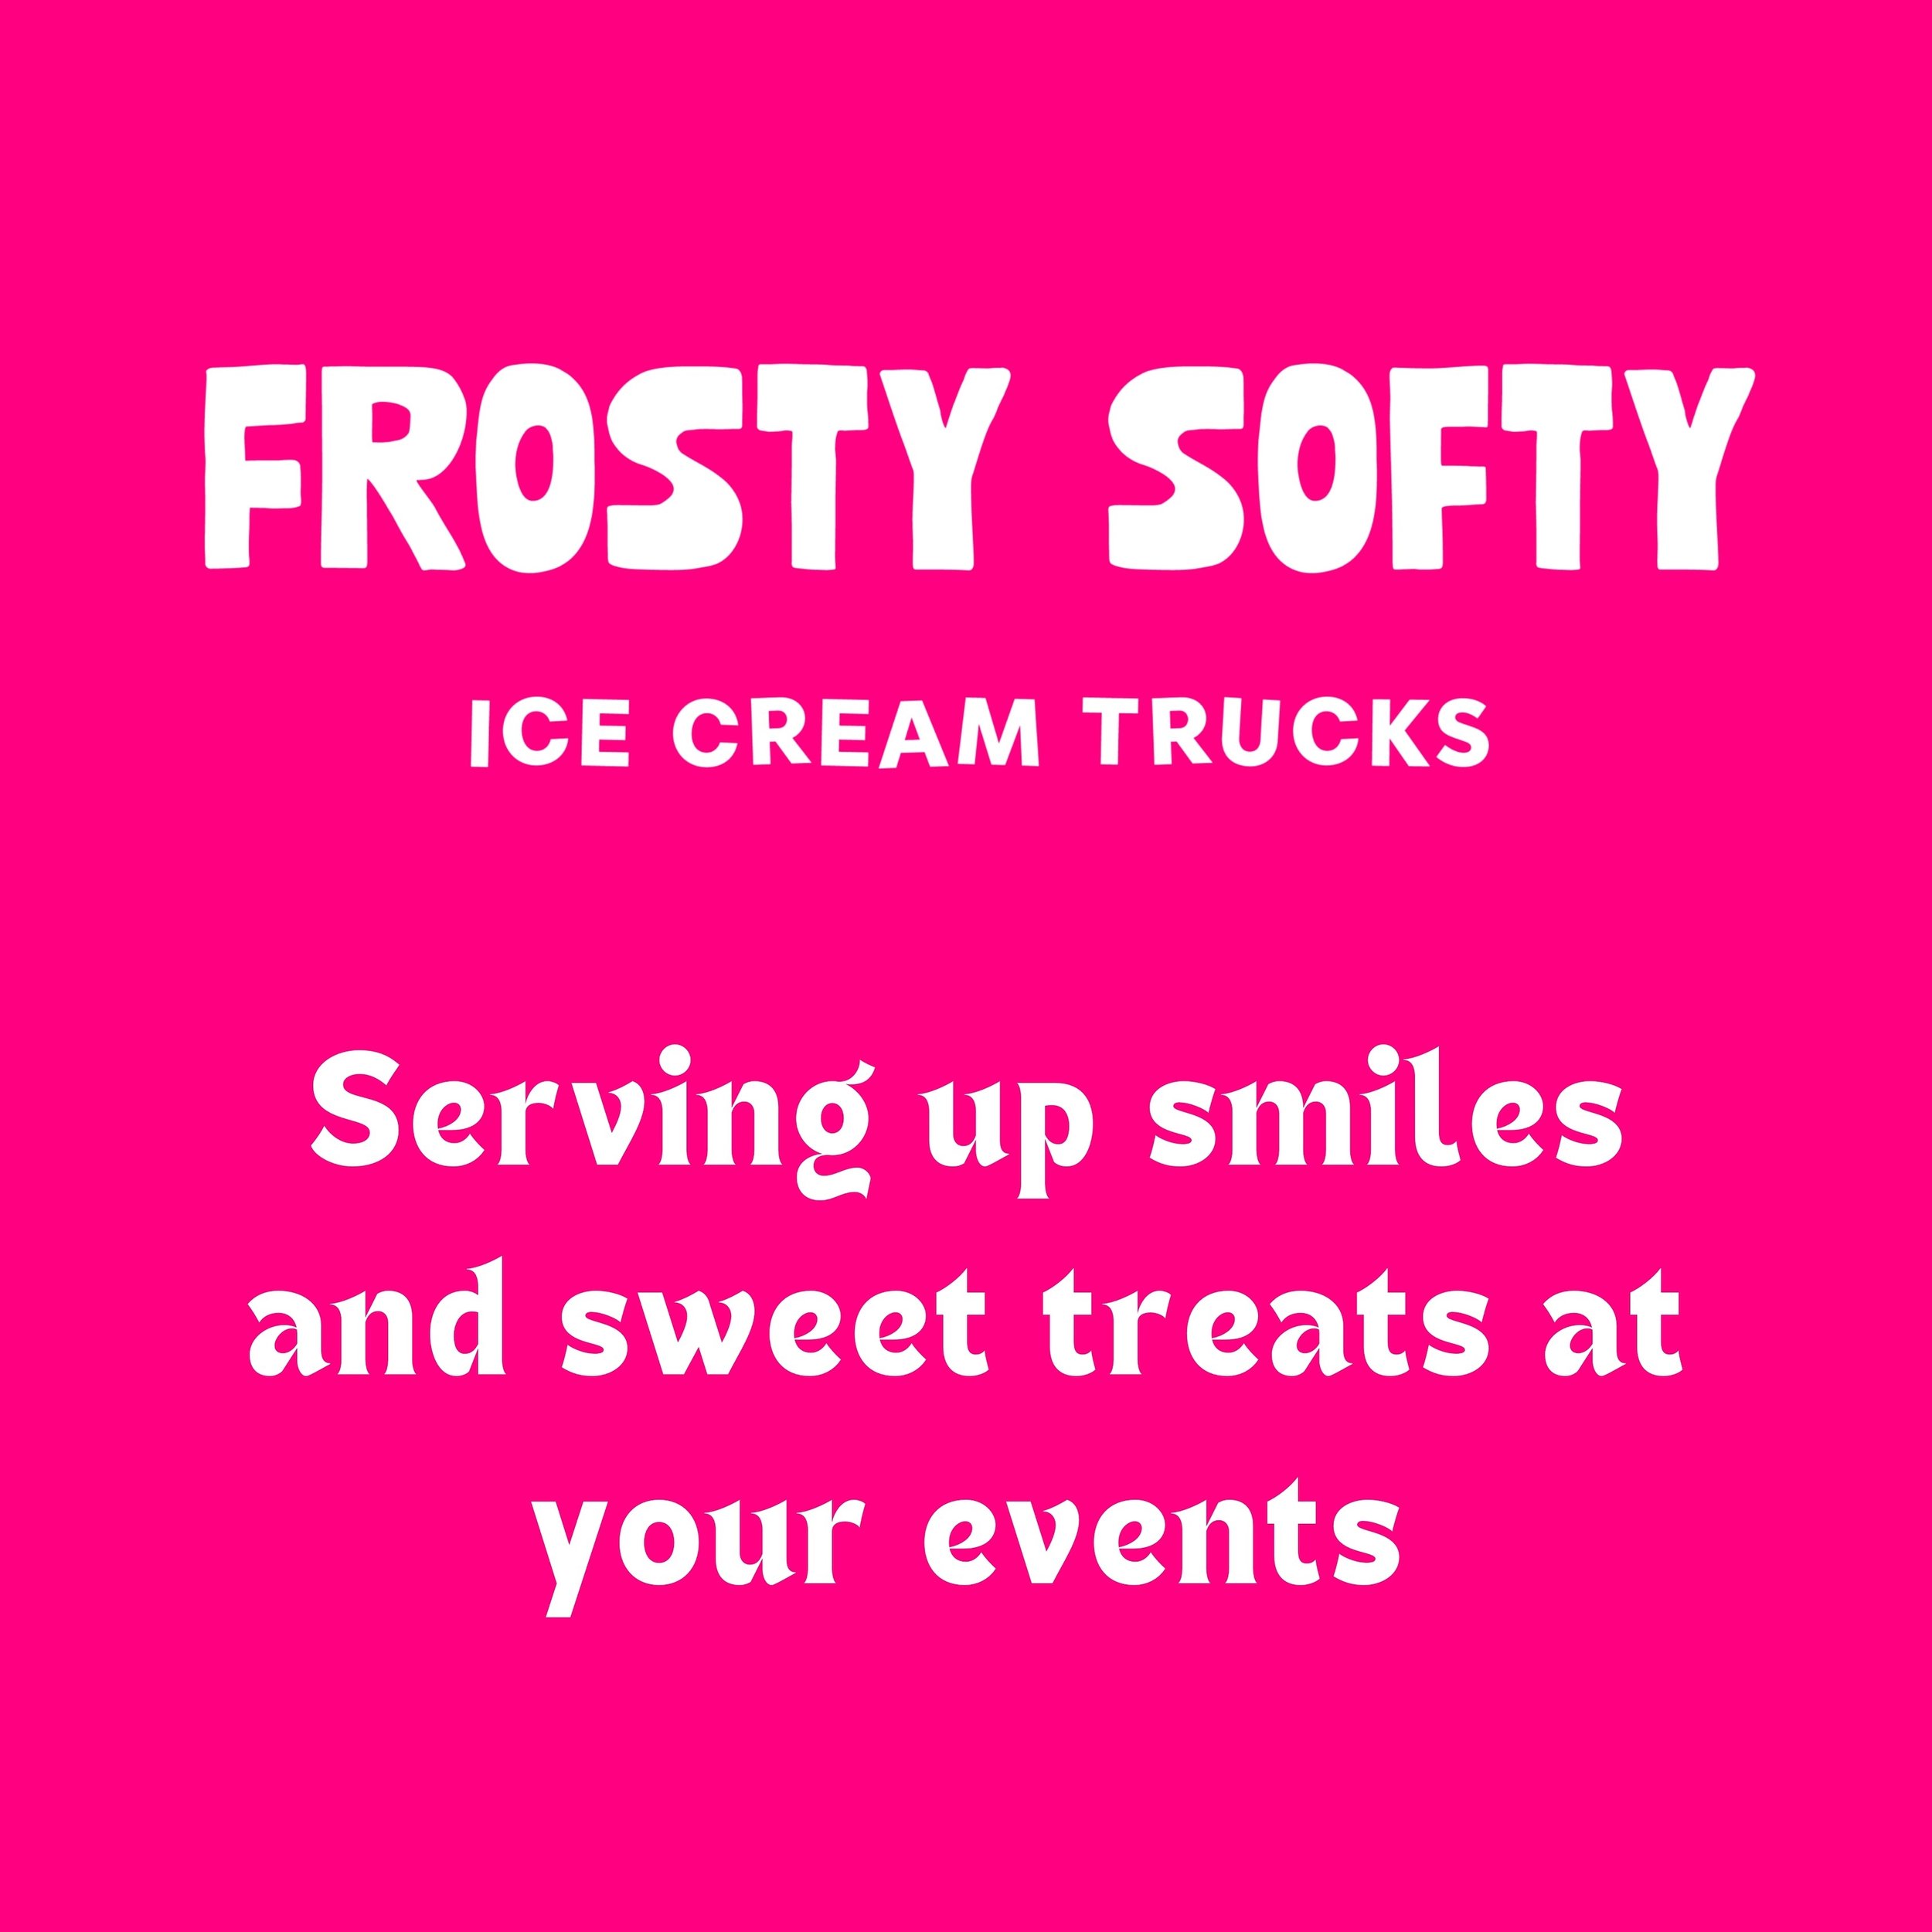 Celebrate every occasion with Frosty Softy's delightful treats and smiles! Book us for your next event

#FrostySofty #DMVCatering #DMVEvents #Catering #DMVFoodie #DMVParties #IceCream #DMVWeddings #DMVCorporateEvents #DMVEventPlanning #SweetTreats #D